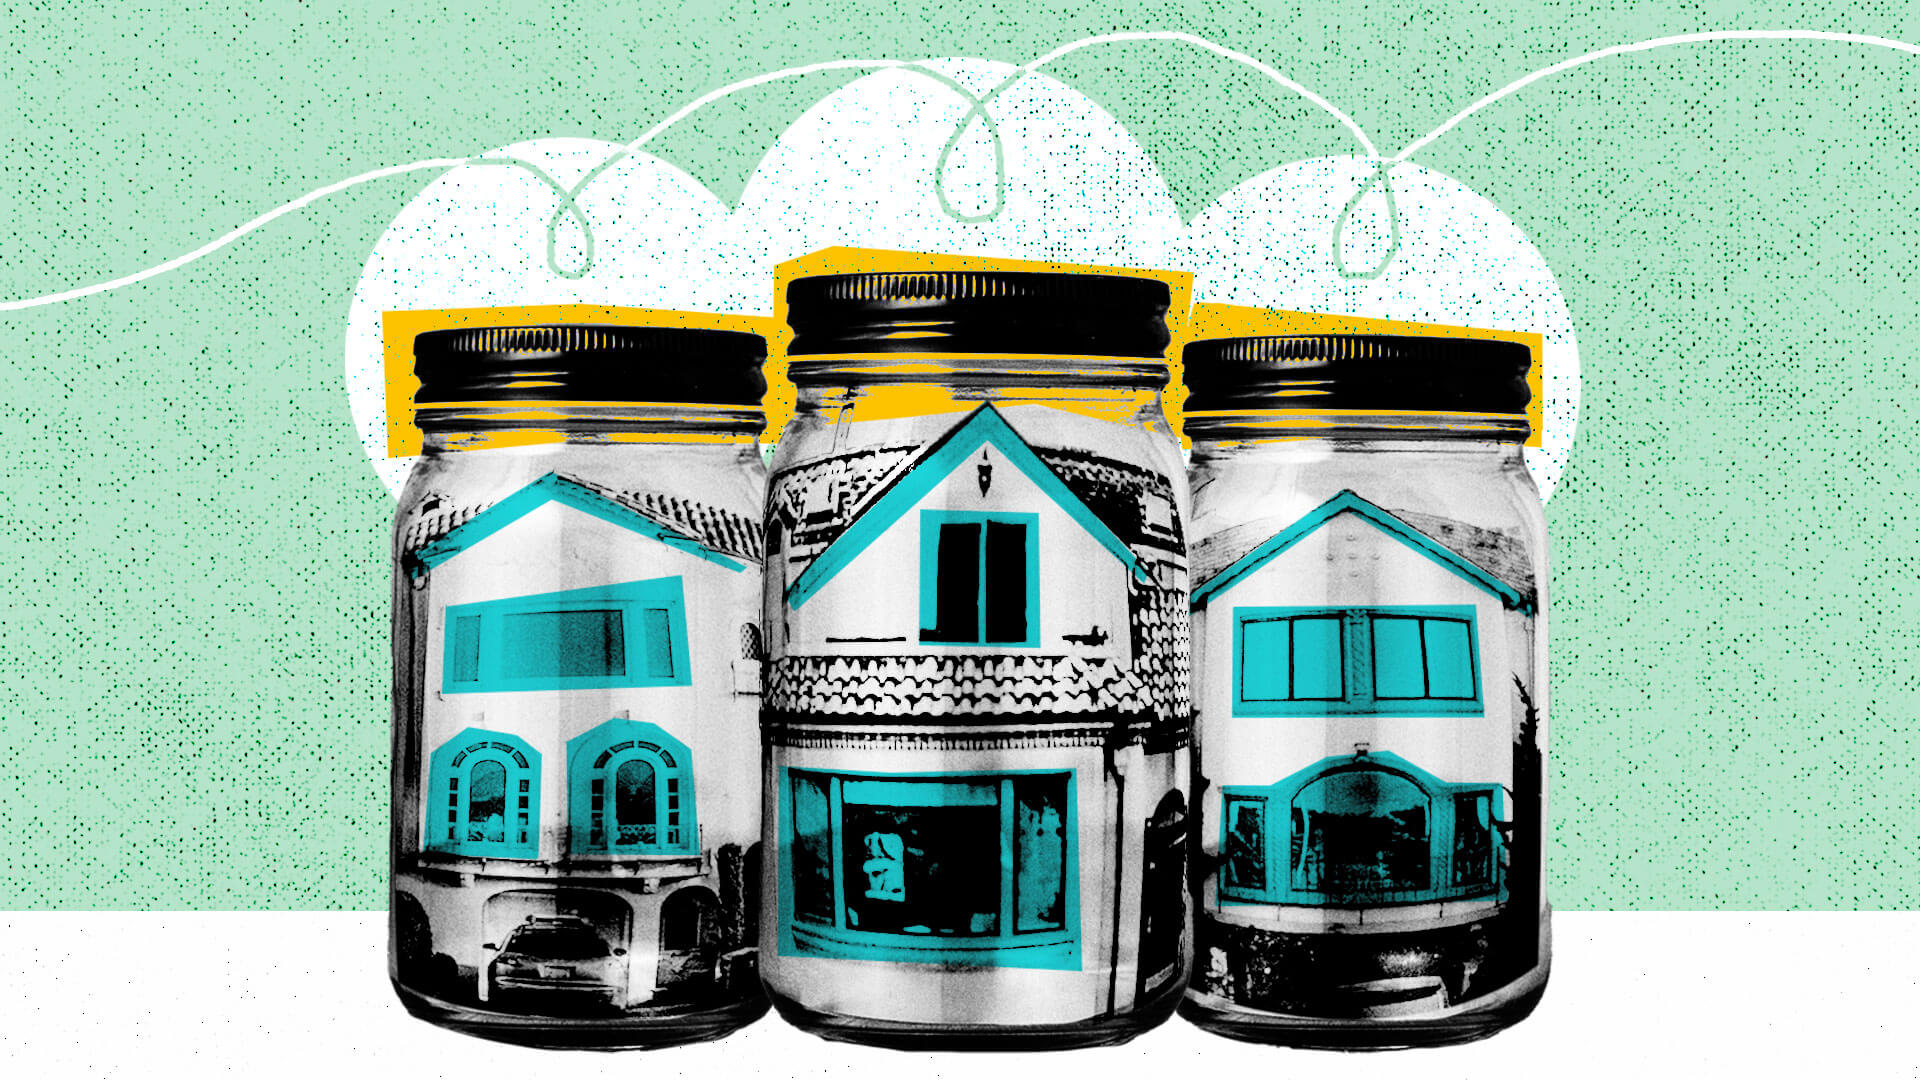 Images of houses in mason jars.